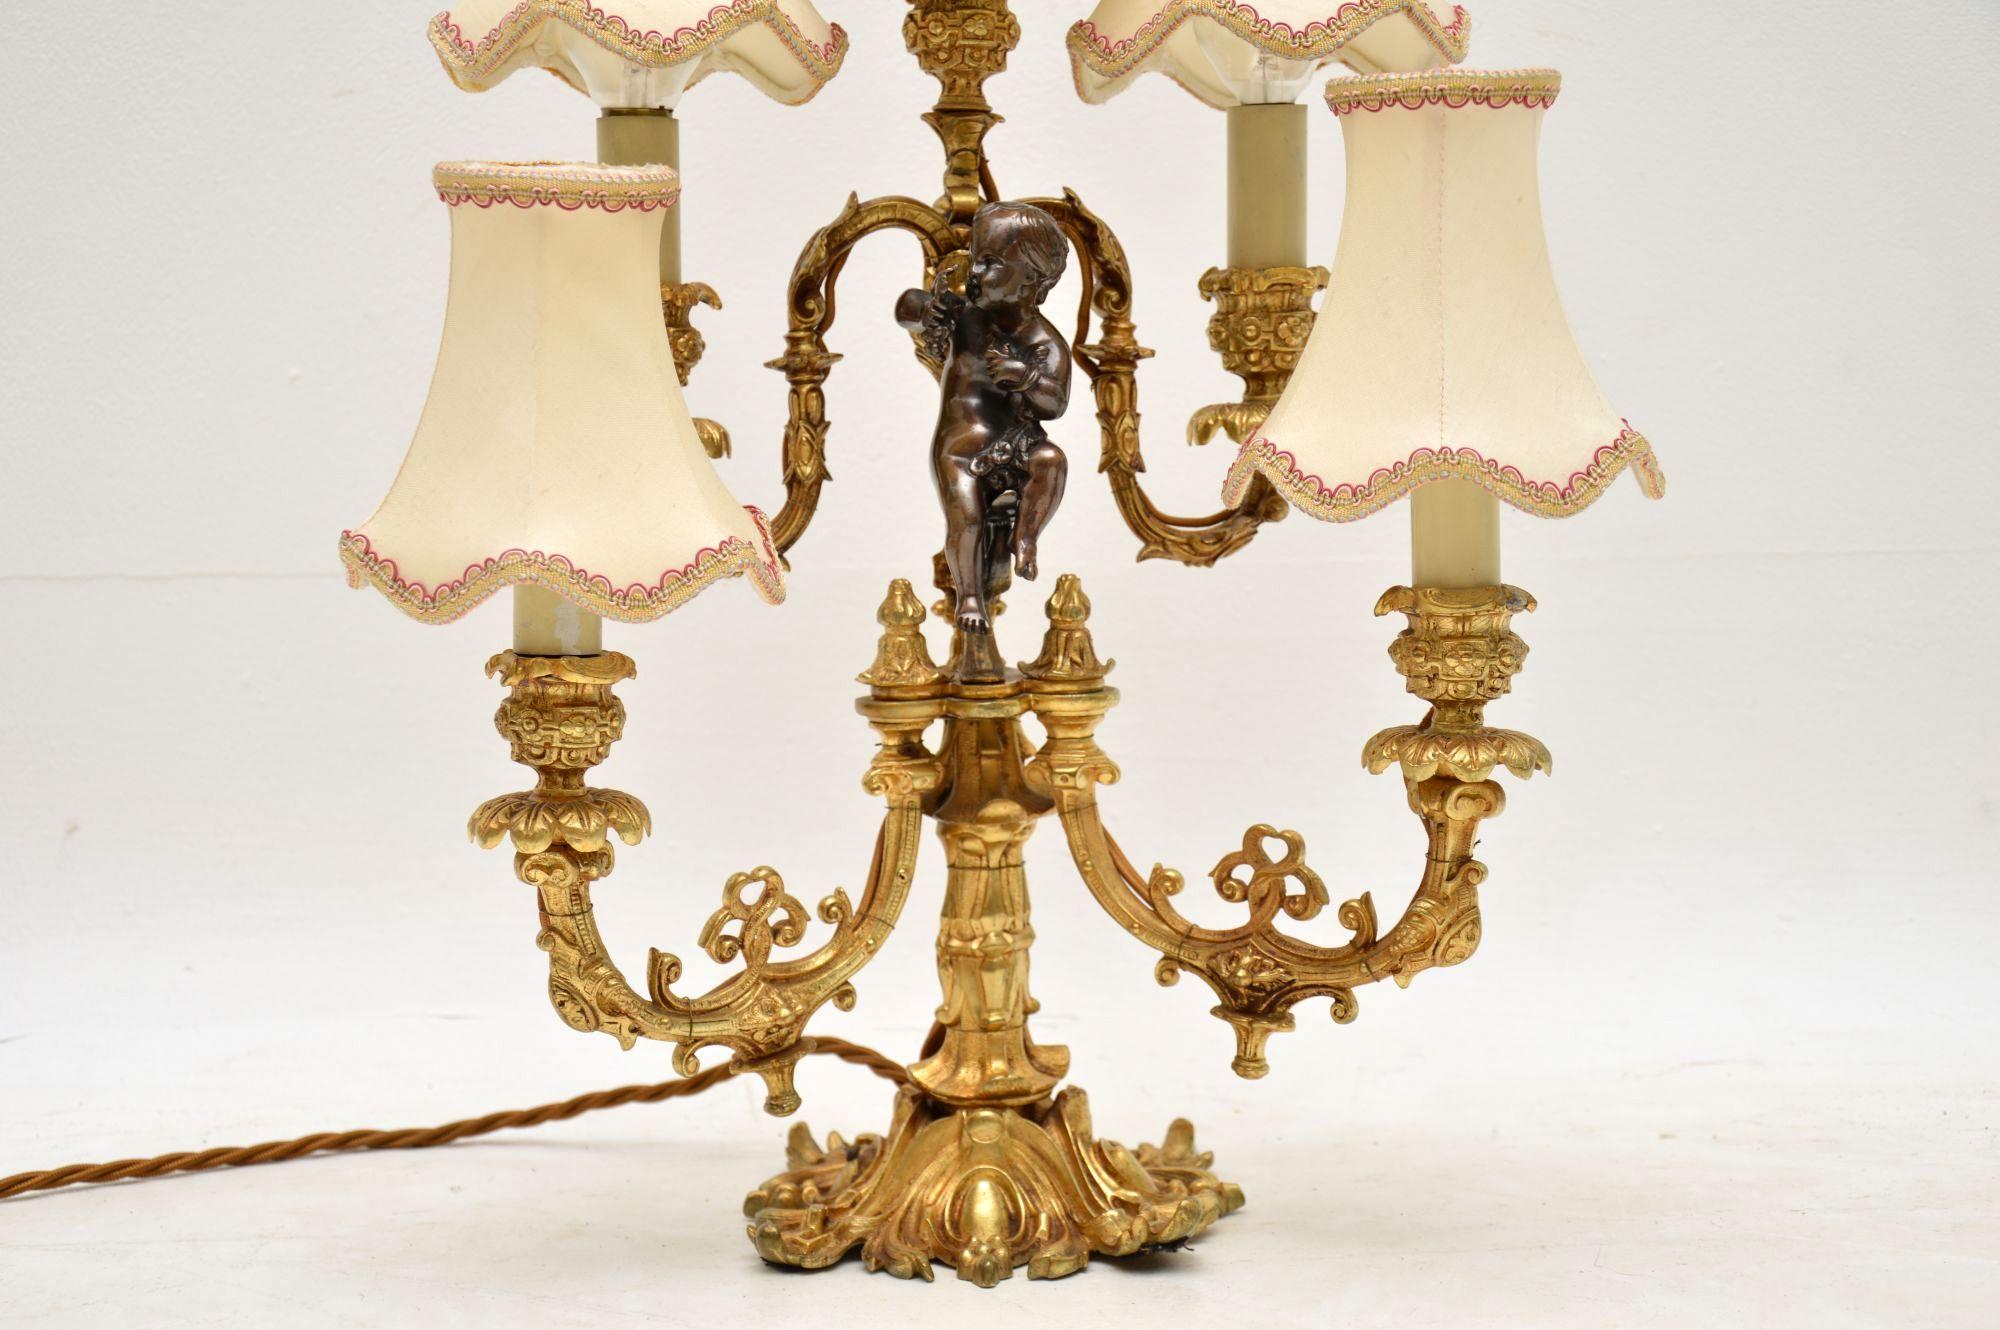 20th Century Antique French Gilt Metal Candelabra Table Lamp